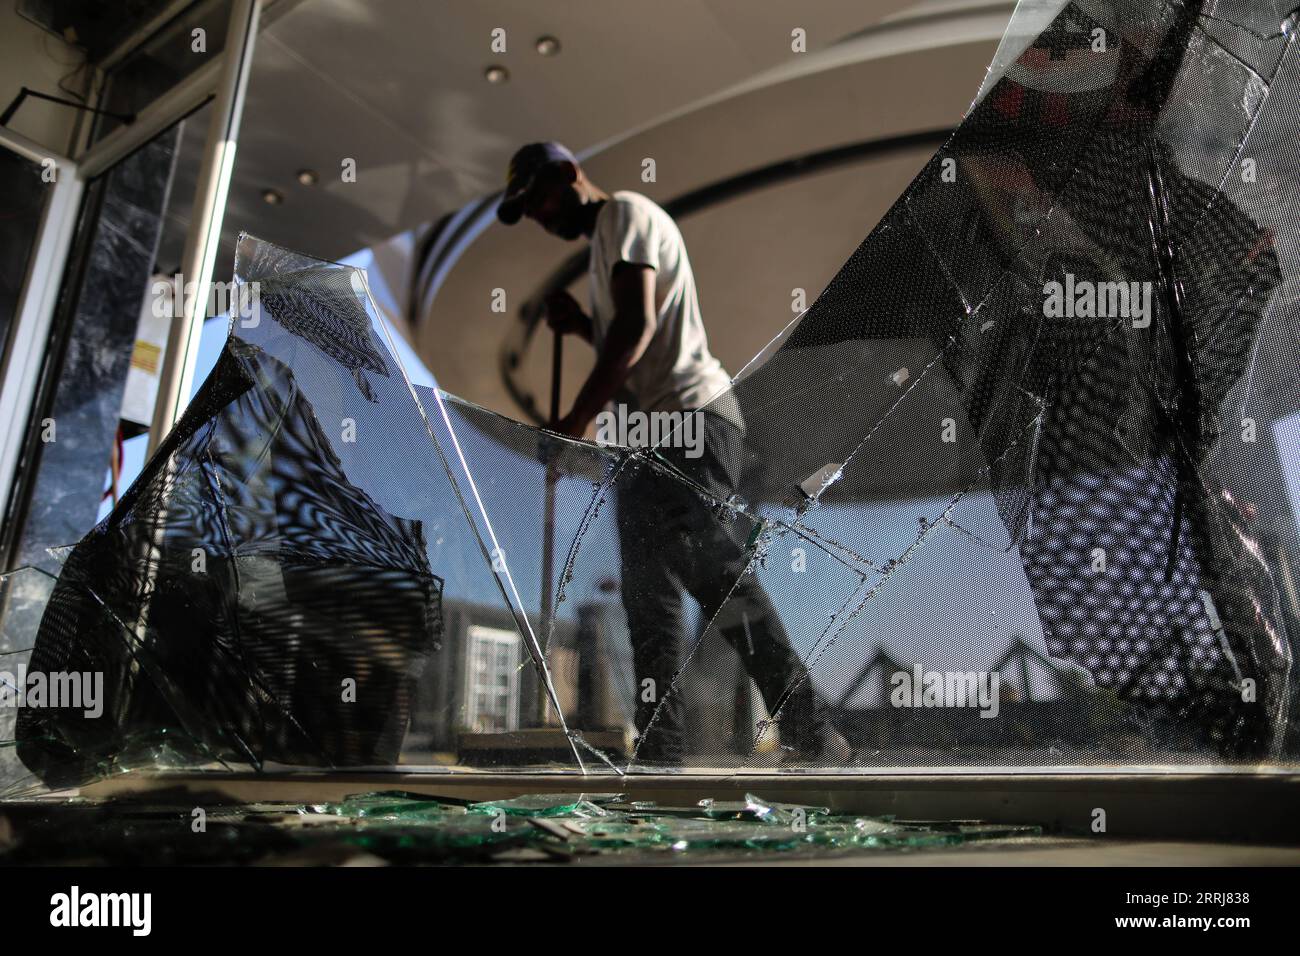 220716 -- GAZA CITY, July 16, 2022 -- A man sweeps glass fragments after an Israeli air strike carried out in Gaza City, on July 16, 2022. Palestinian militants fired four rockets from the Gaza Strip into Israeli territory early Saturday. There were no casualties or damage as a result of the attacks. Israeli Defense Forces IDF responded with an airstrike against targets in Gaza. Photo by /Xinhua MIDEAST-GAZA CITY-AIRSTRIKE YasserxQudih PUBLICATIONxNOTxINxCHN Stock Photo